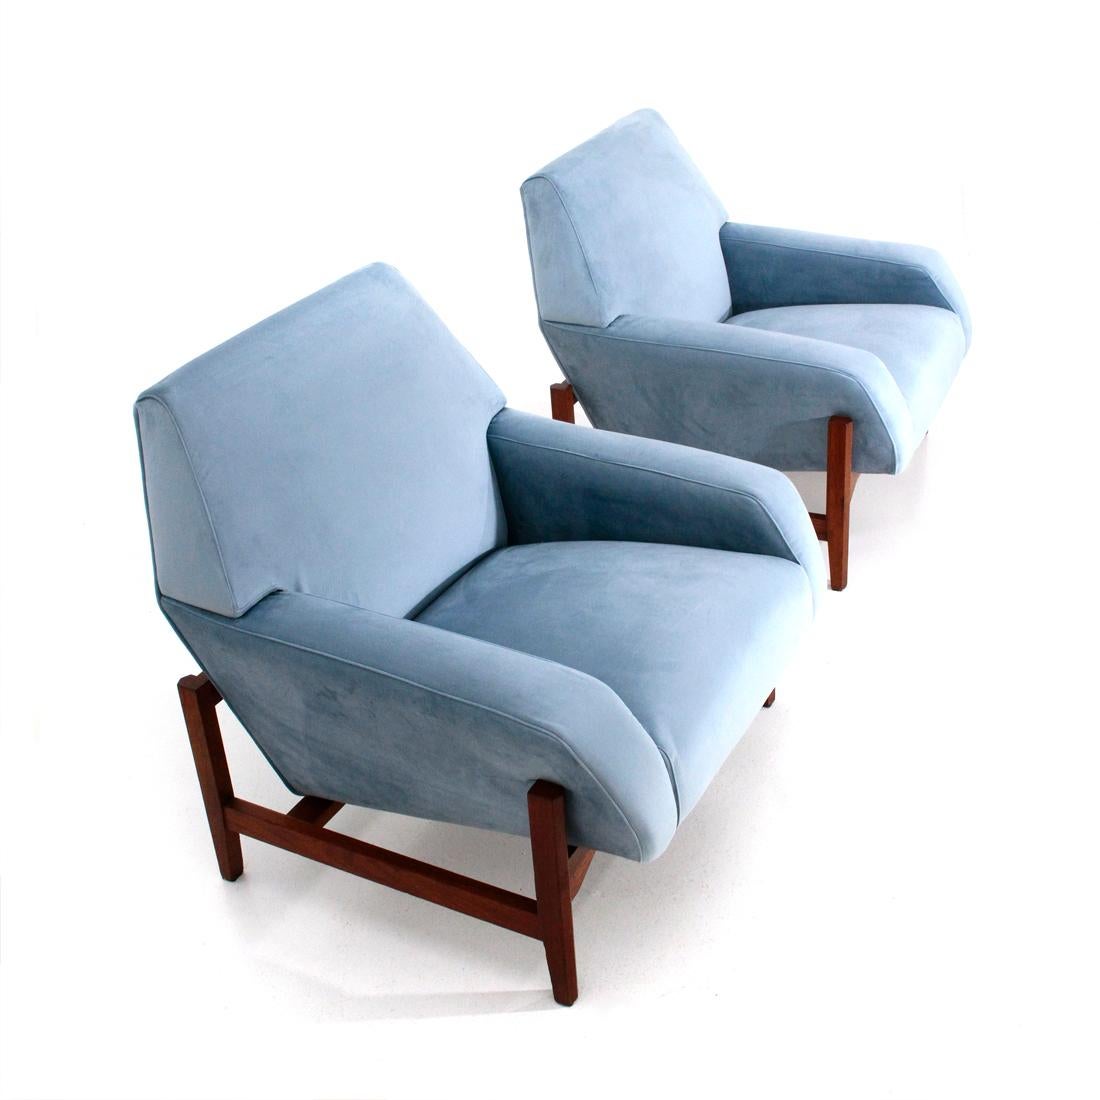 Pair of armchairs produced by Gilberto Cassina in the 1950s, designed by Attilio Allievi.
Solid wood base.
Wooden structure padded and lined with new light blue velvet fabric.
Good general condition, some signs due to normal use of